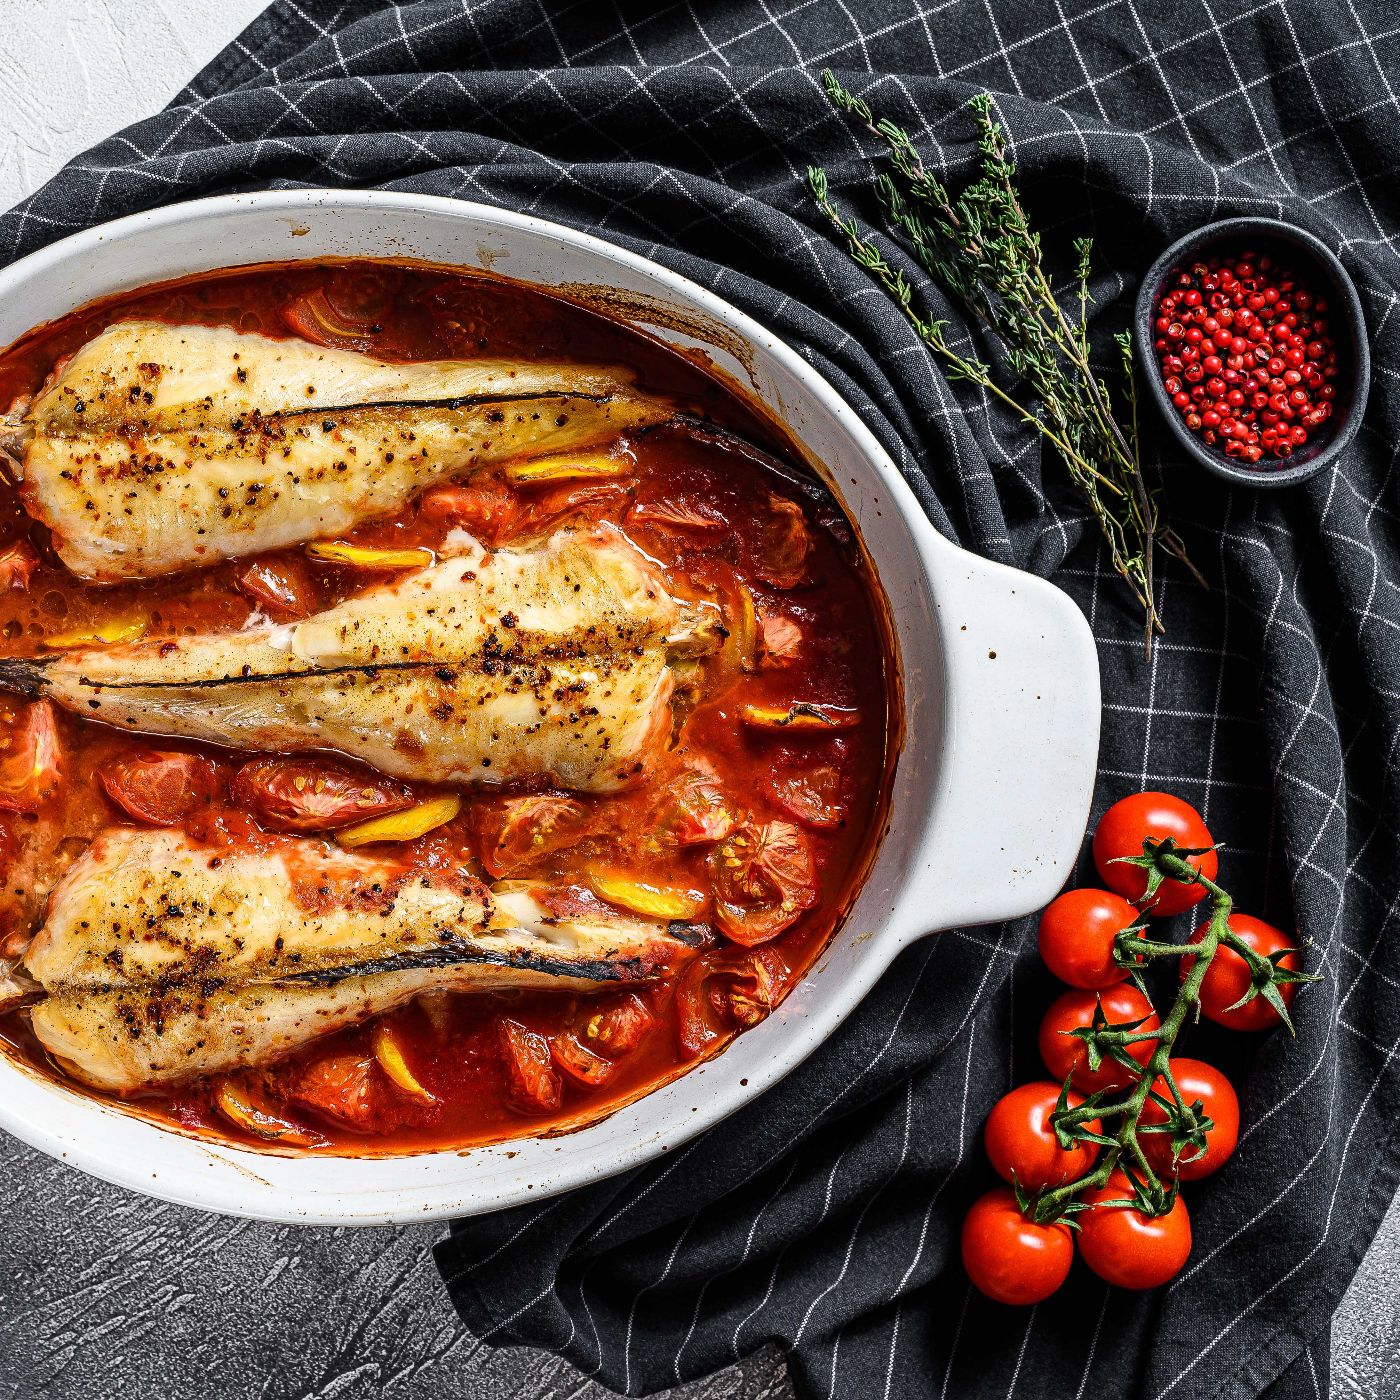 Monkfish-baked-in-tomatoes-in-a-baking-dish.-Black-background.-Top-view-1254304592_6048x4024 square.jpeg